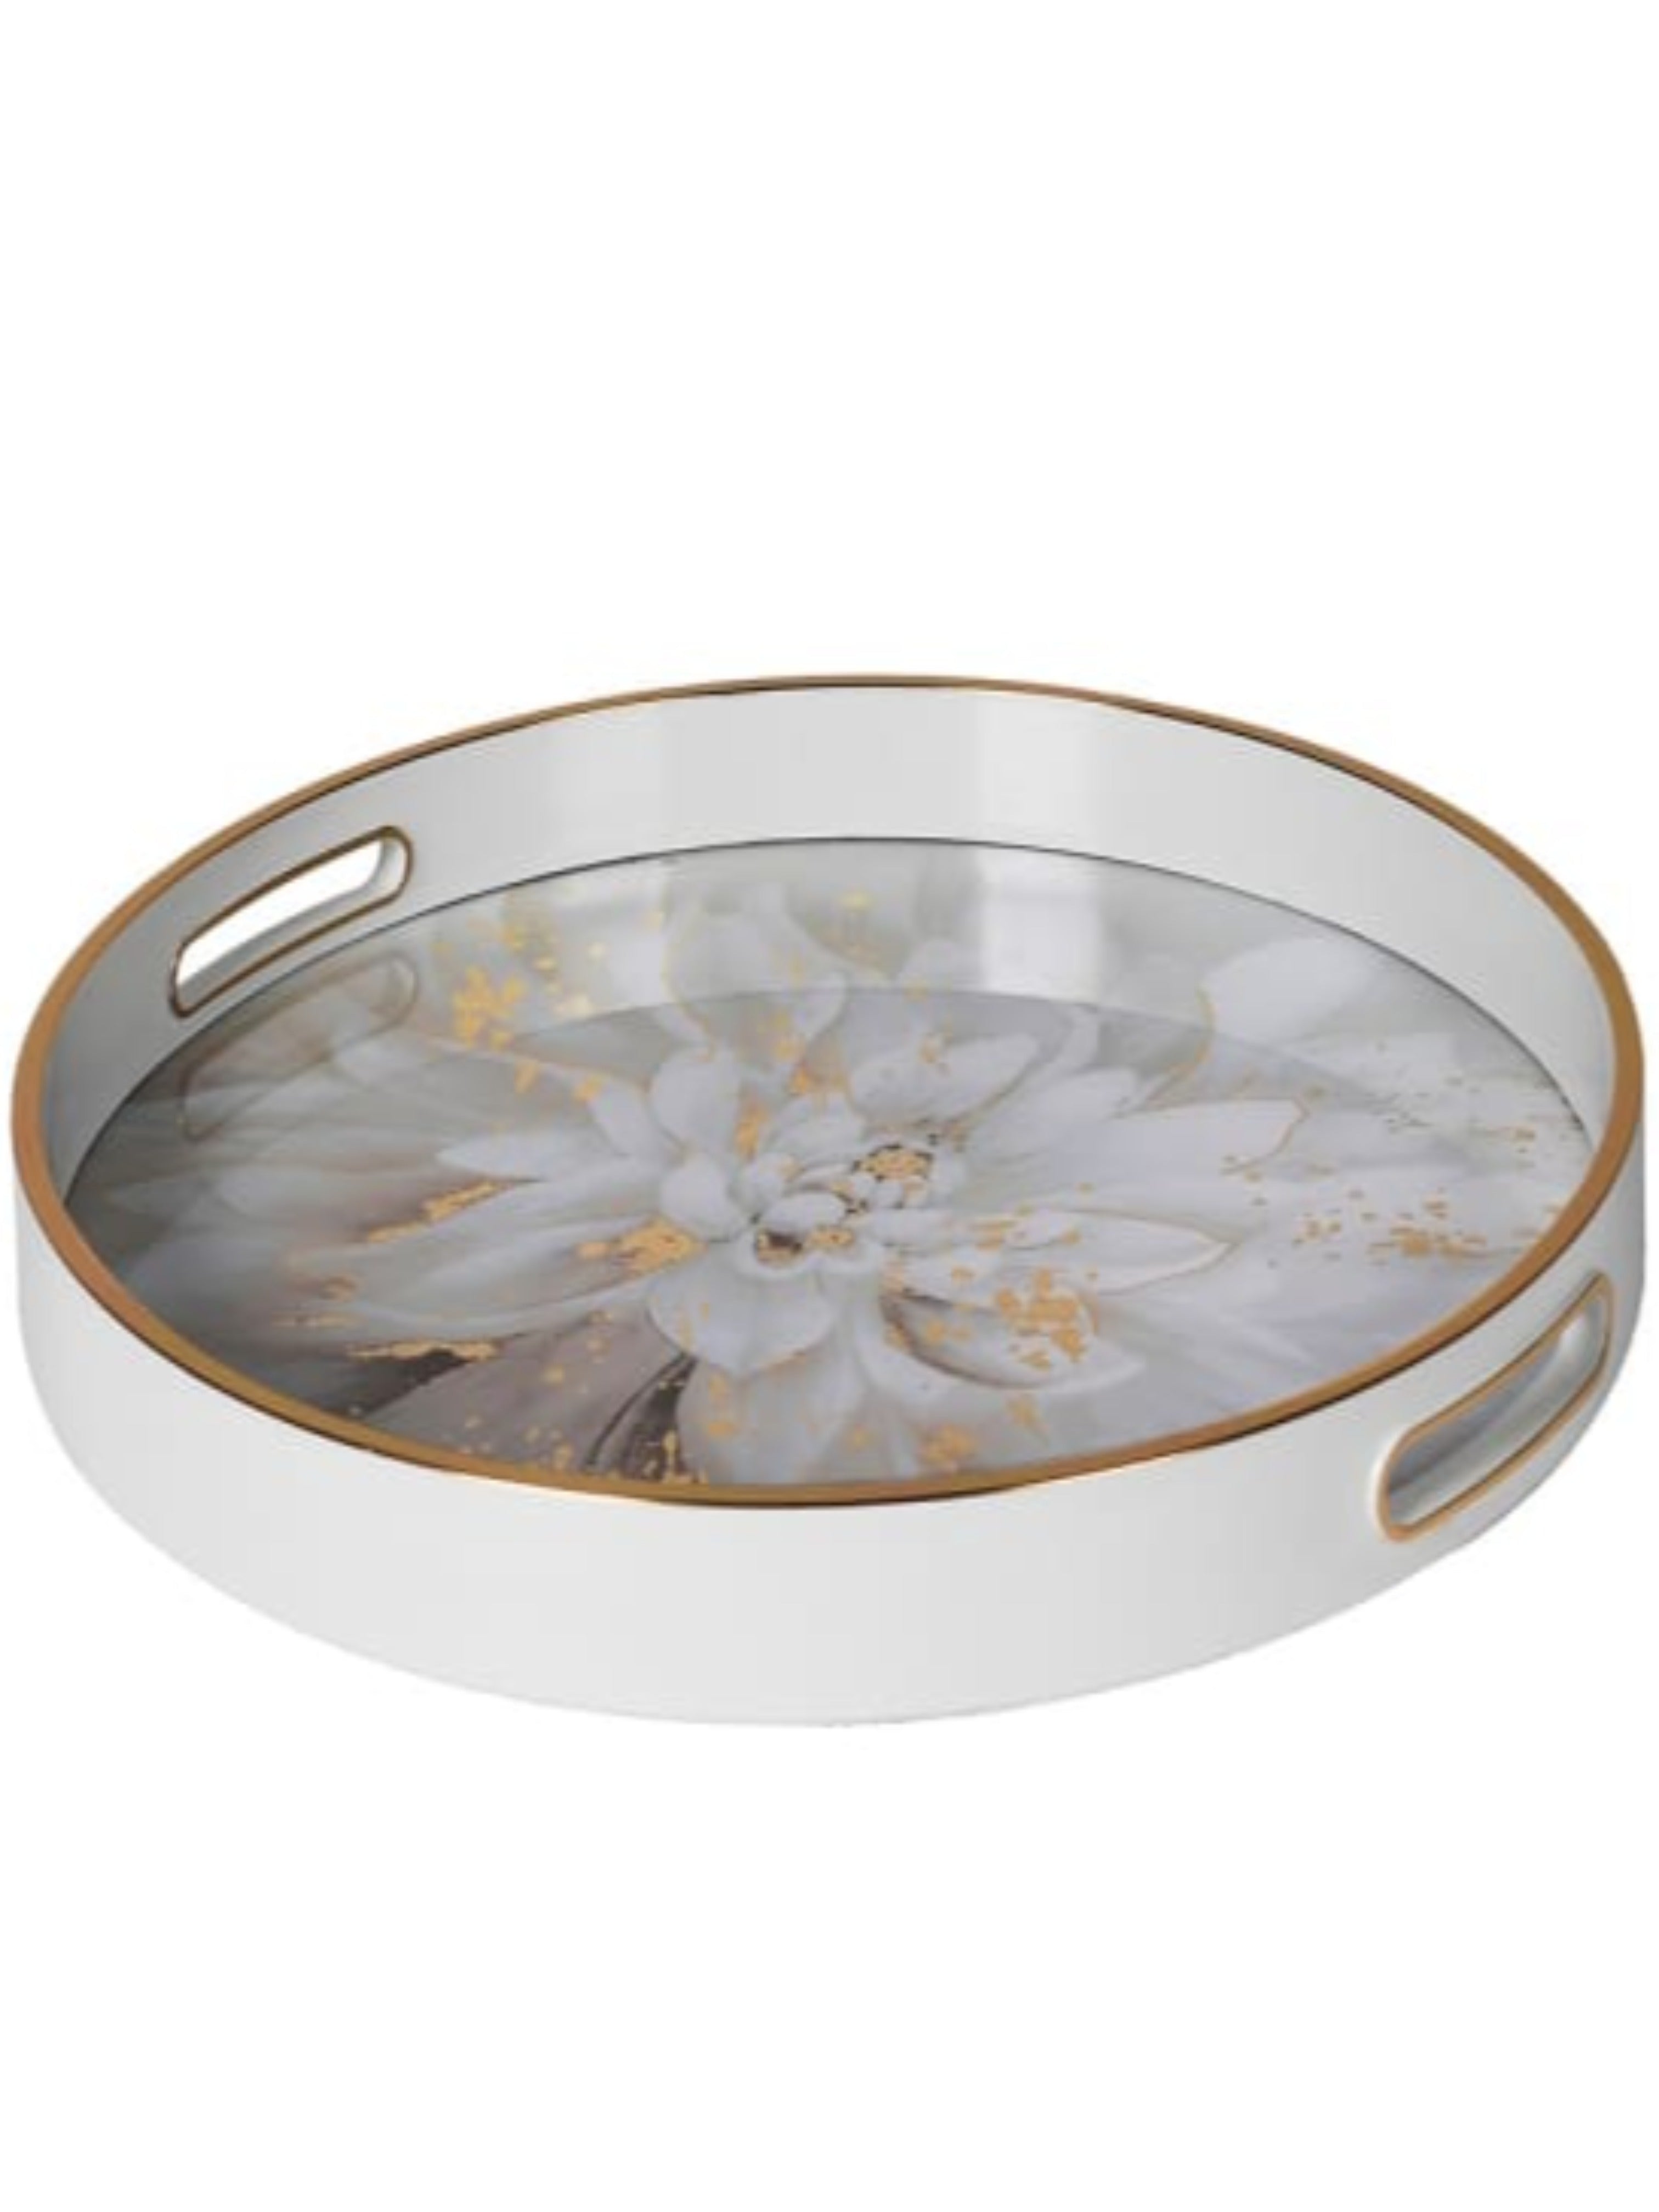 White Floral Tray with Golden Accents